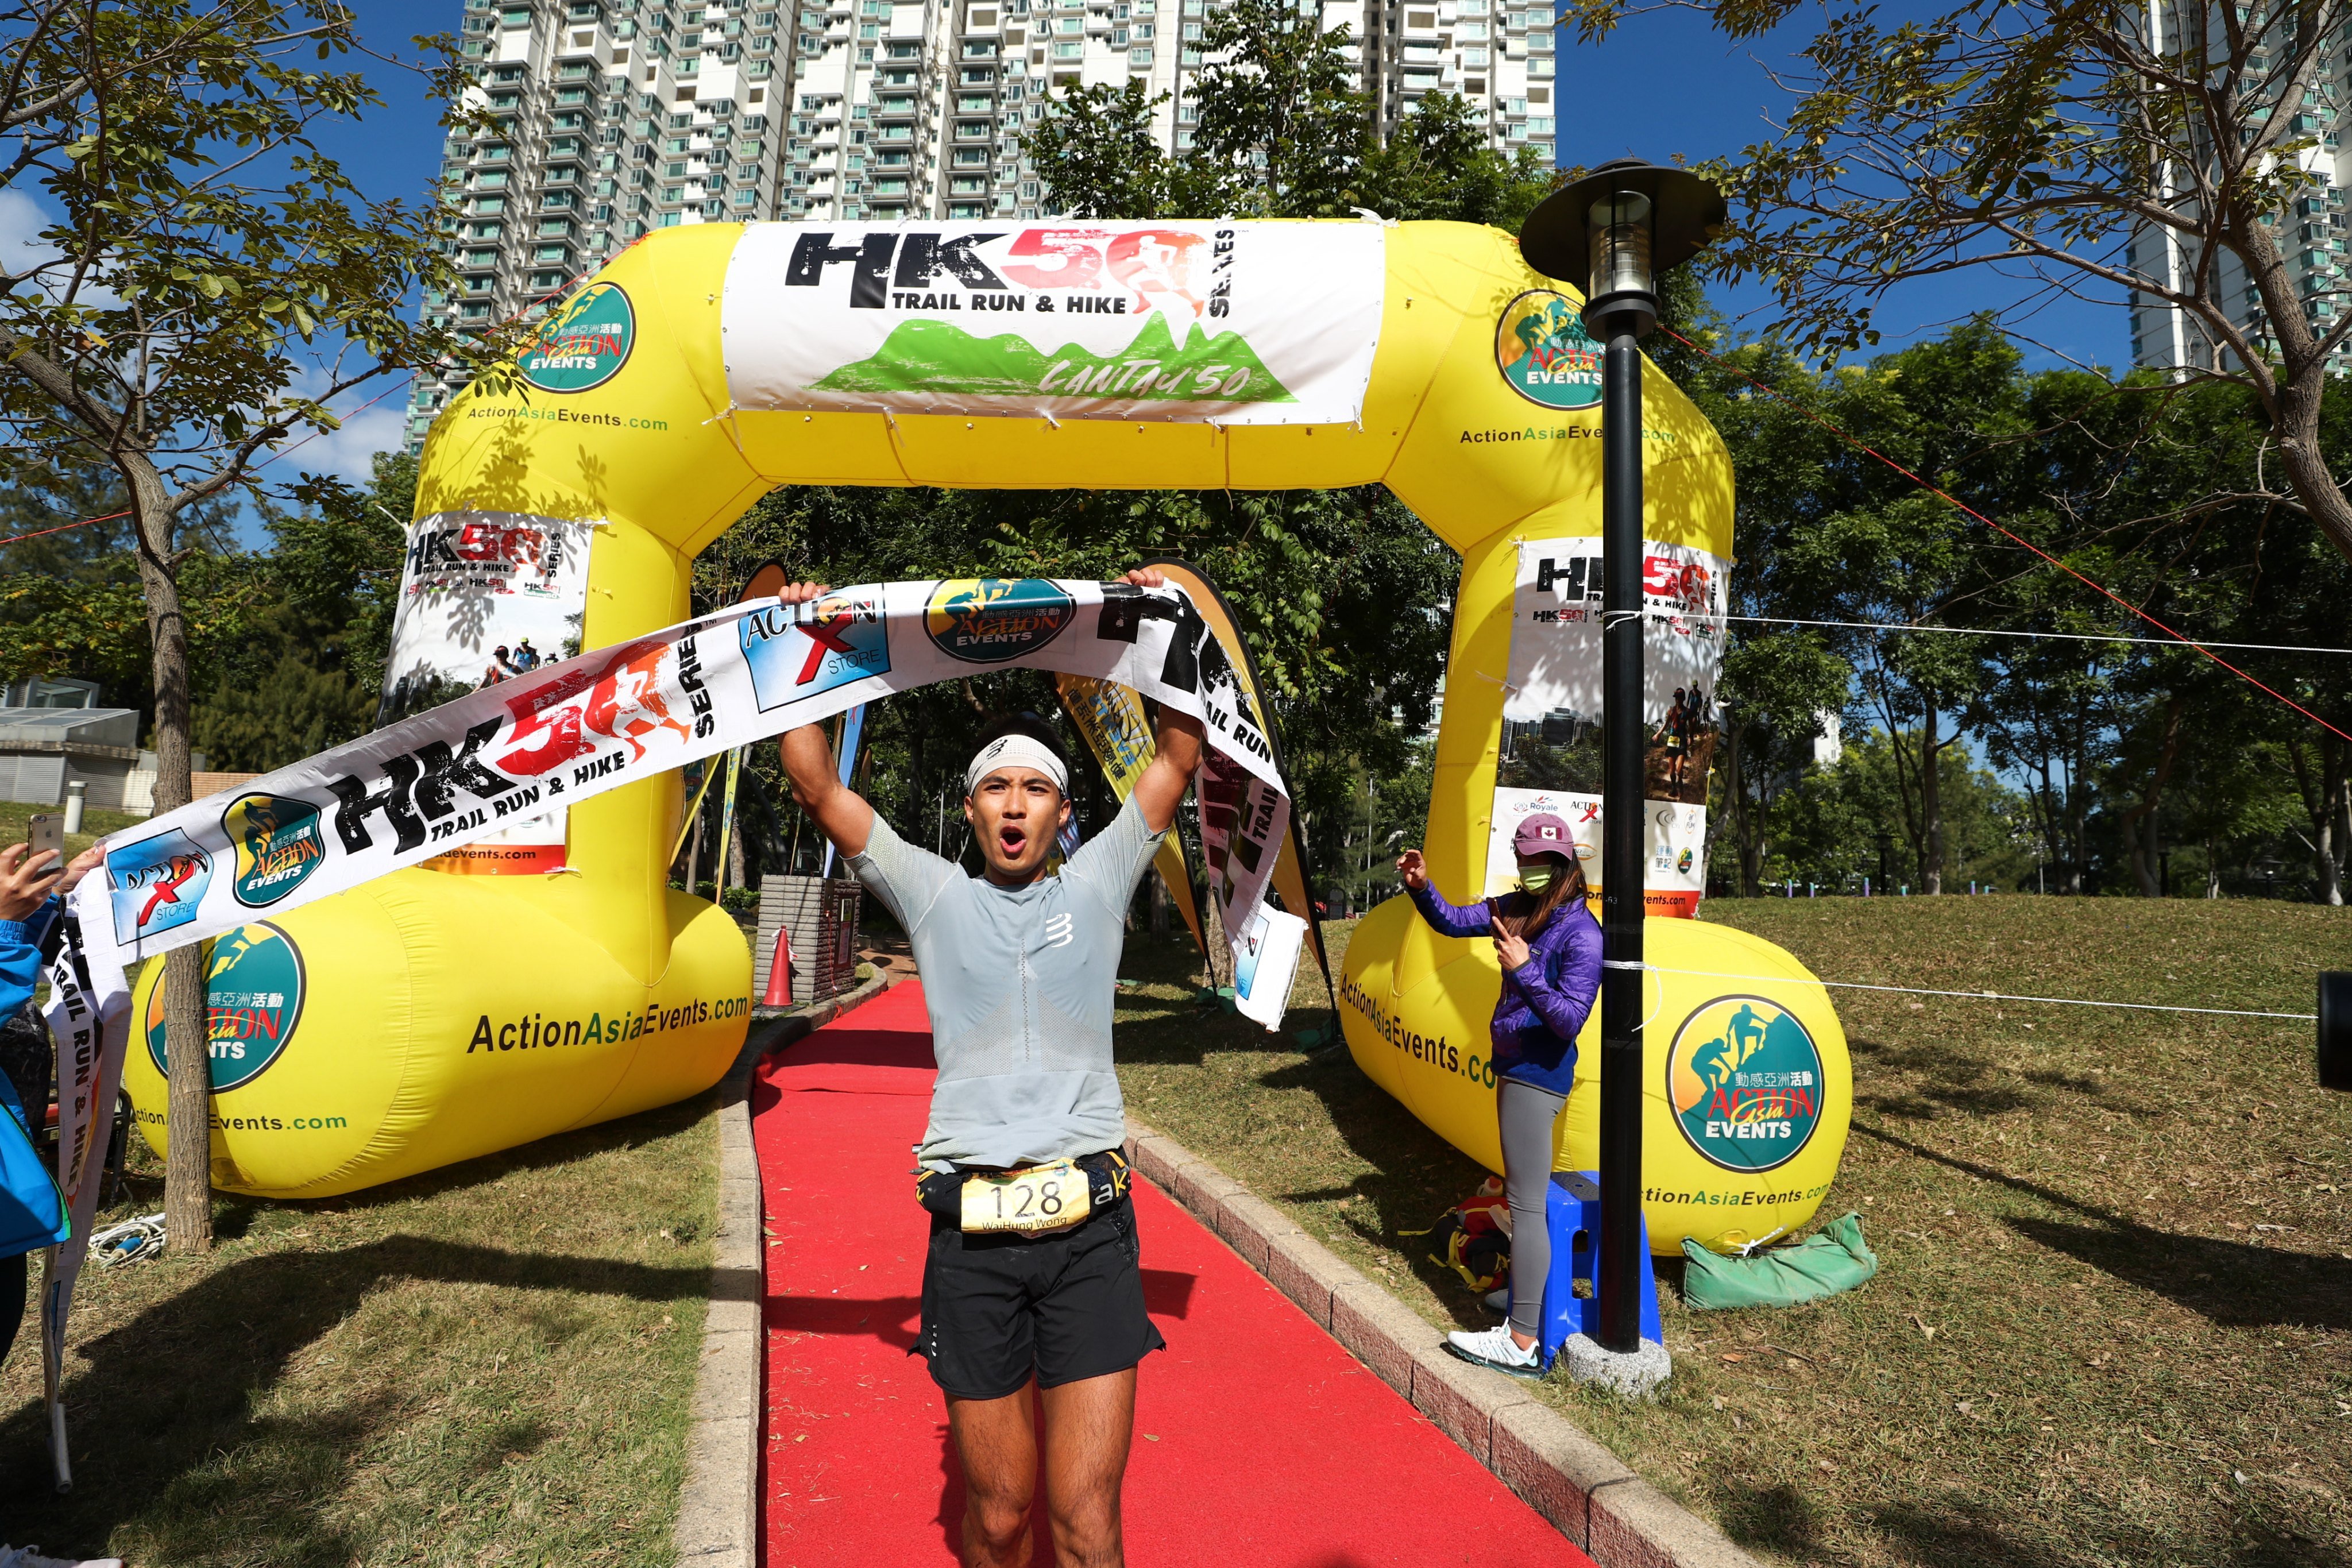 Wong Wai-hung is the first Hong Kong runner to cross the finish line in the Lantau 50, finishing second in the men’s division. Photo: Handout